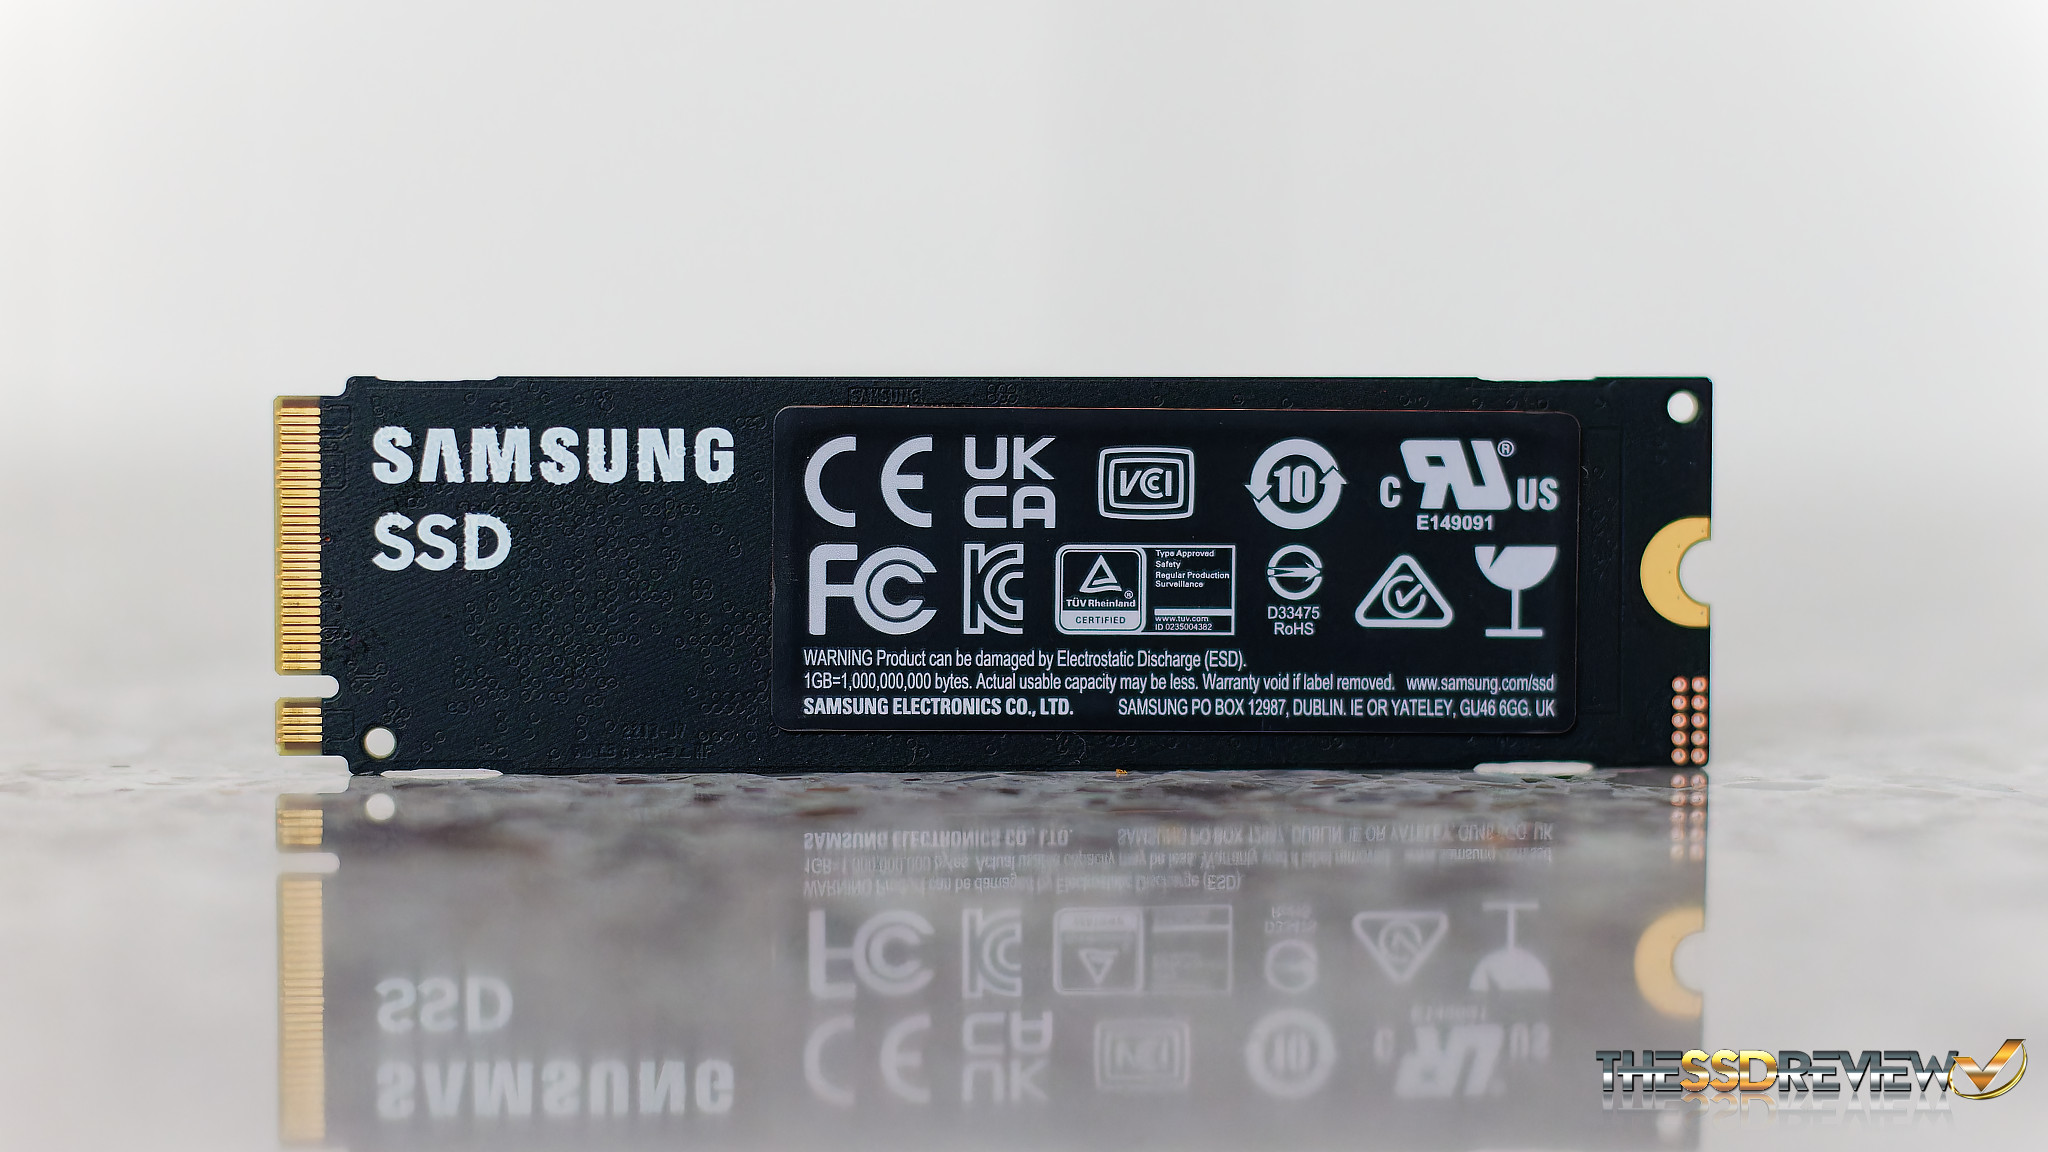 Samsung 990 Pro SSD Review - Samsung Reigns True Yet Again